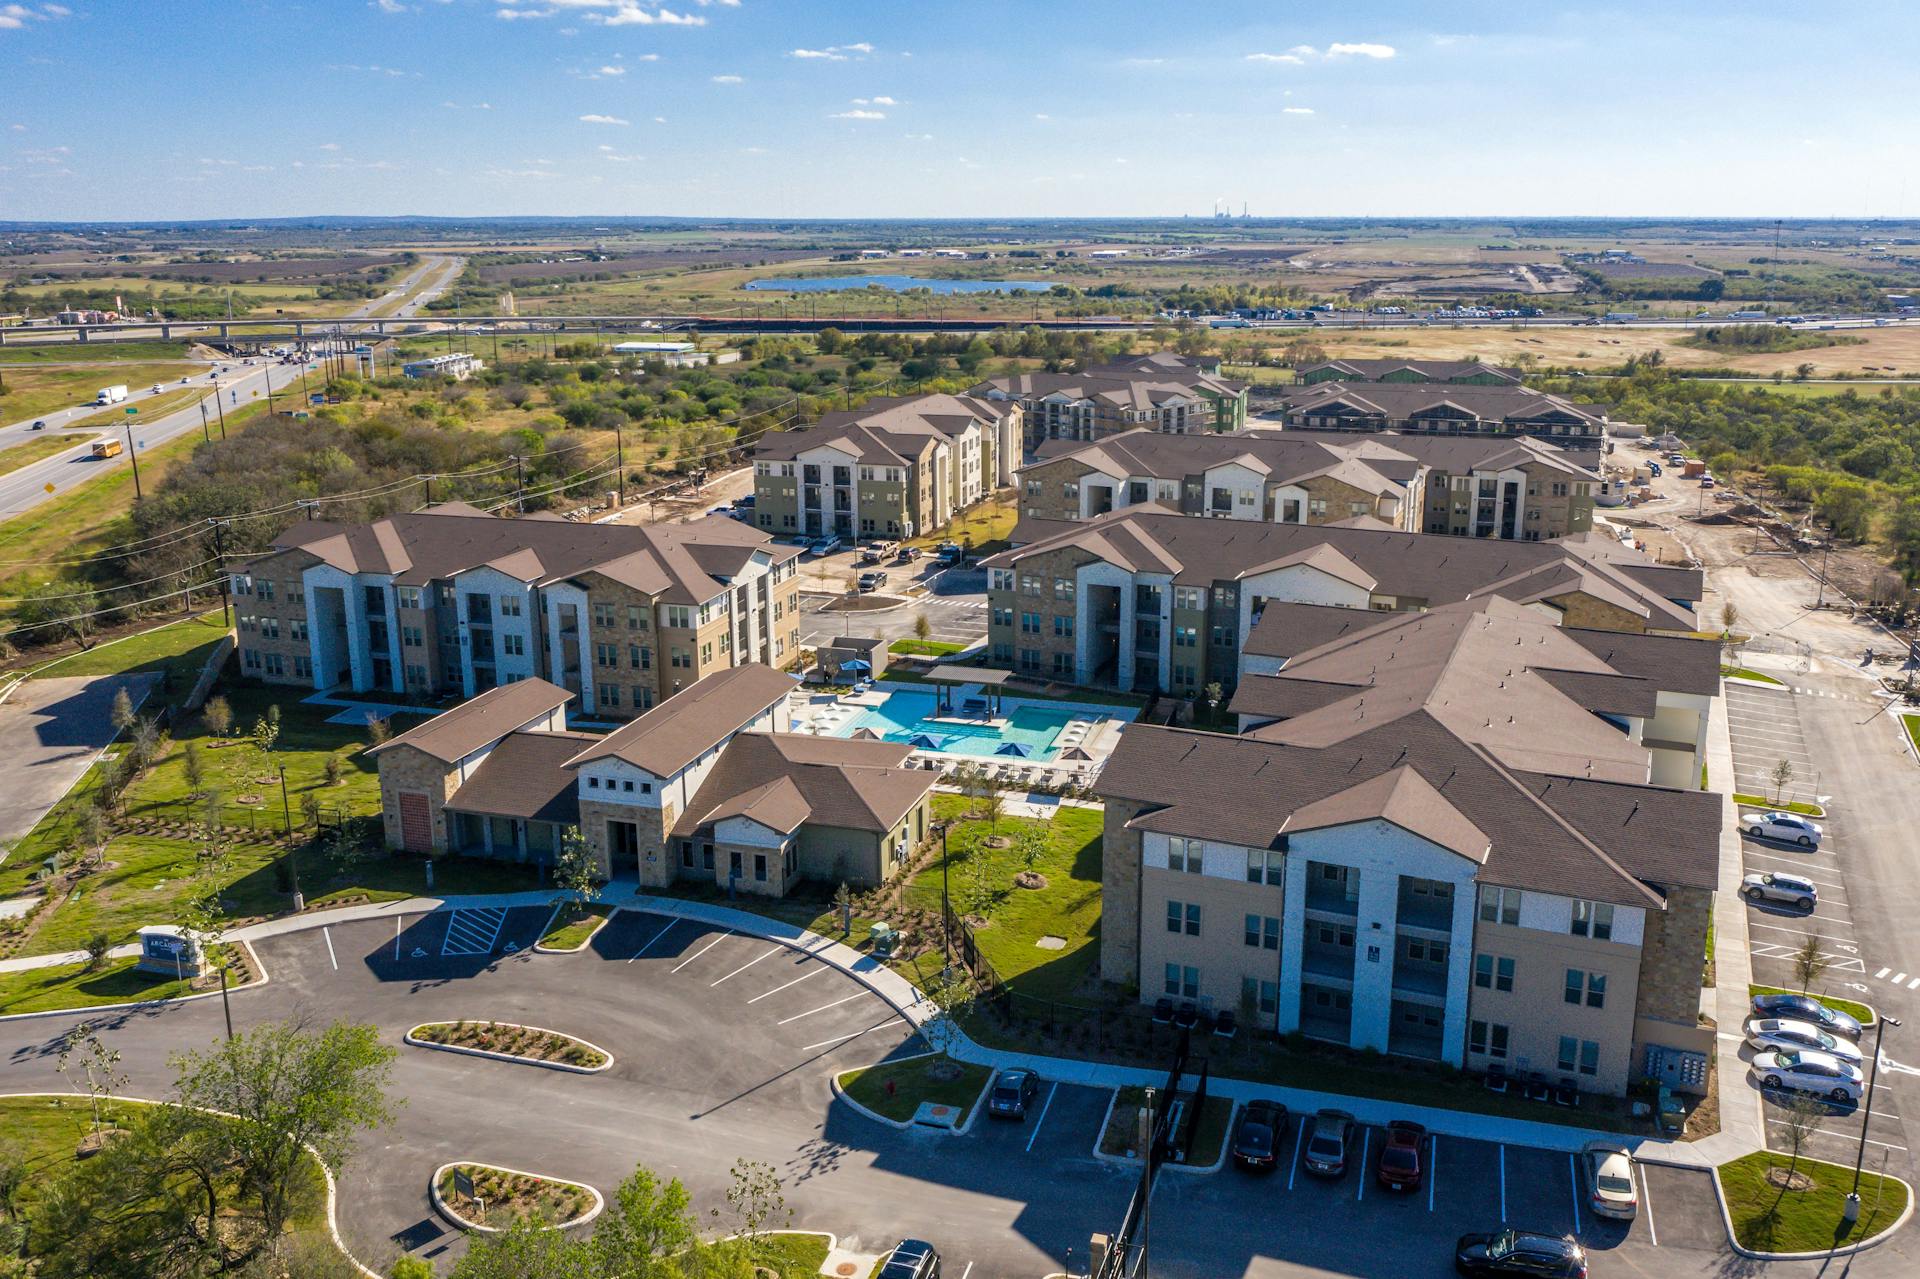 A sky view of an apartment complex